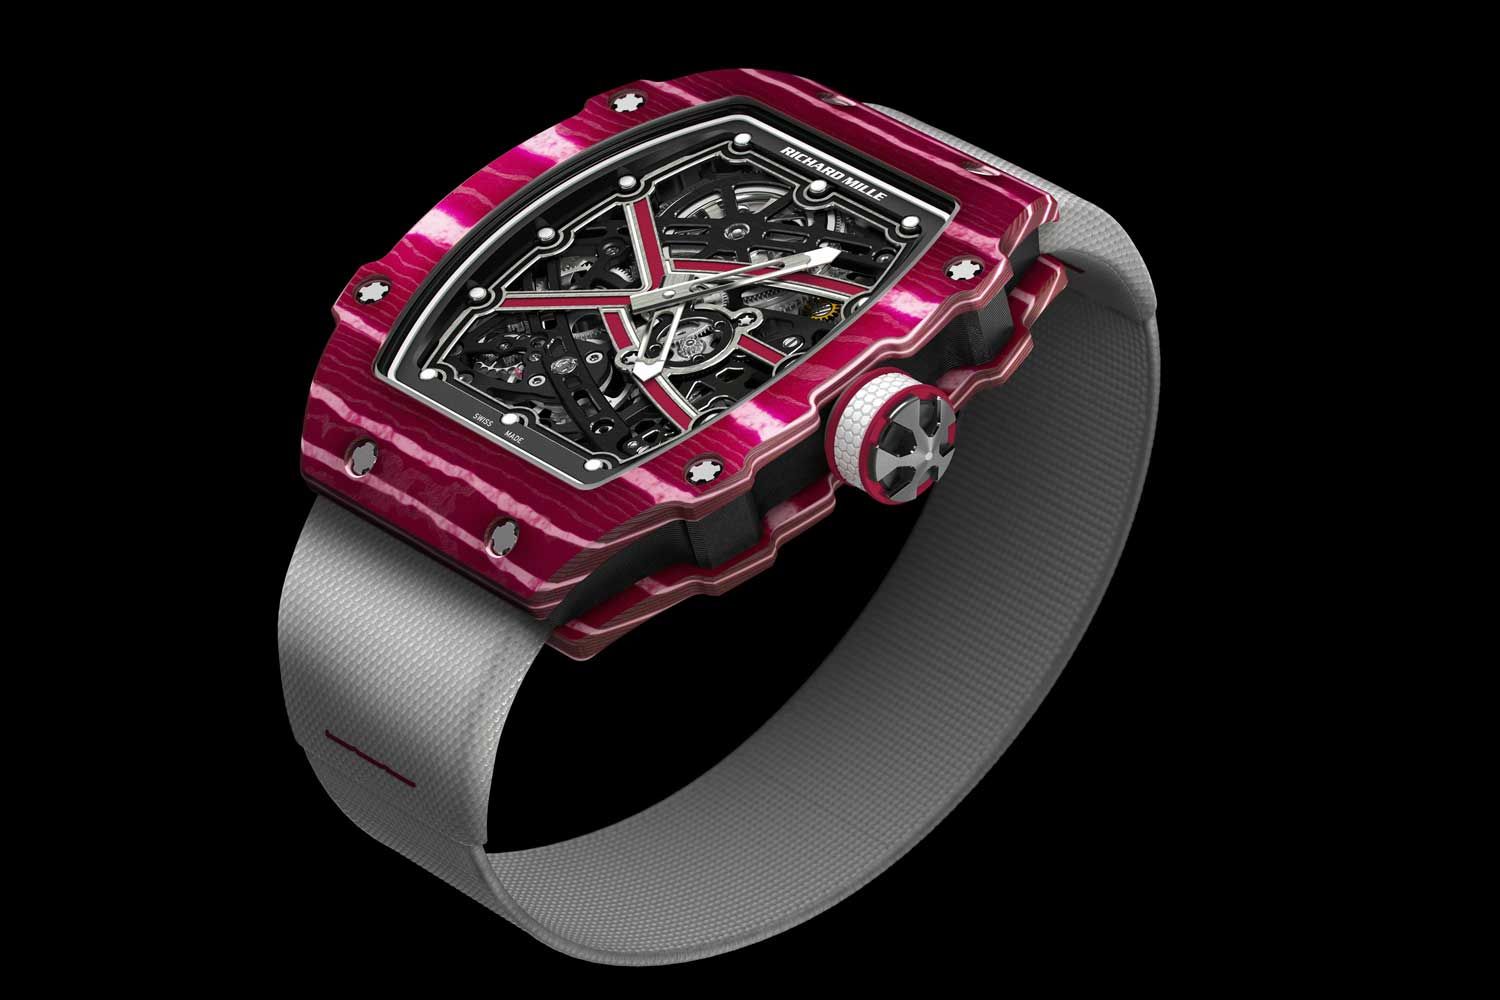 At 38.7mm wide and 7.8mm in height, the RM 67-02 is one of the first from Richard Mille to revisit classic dimensions